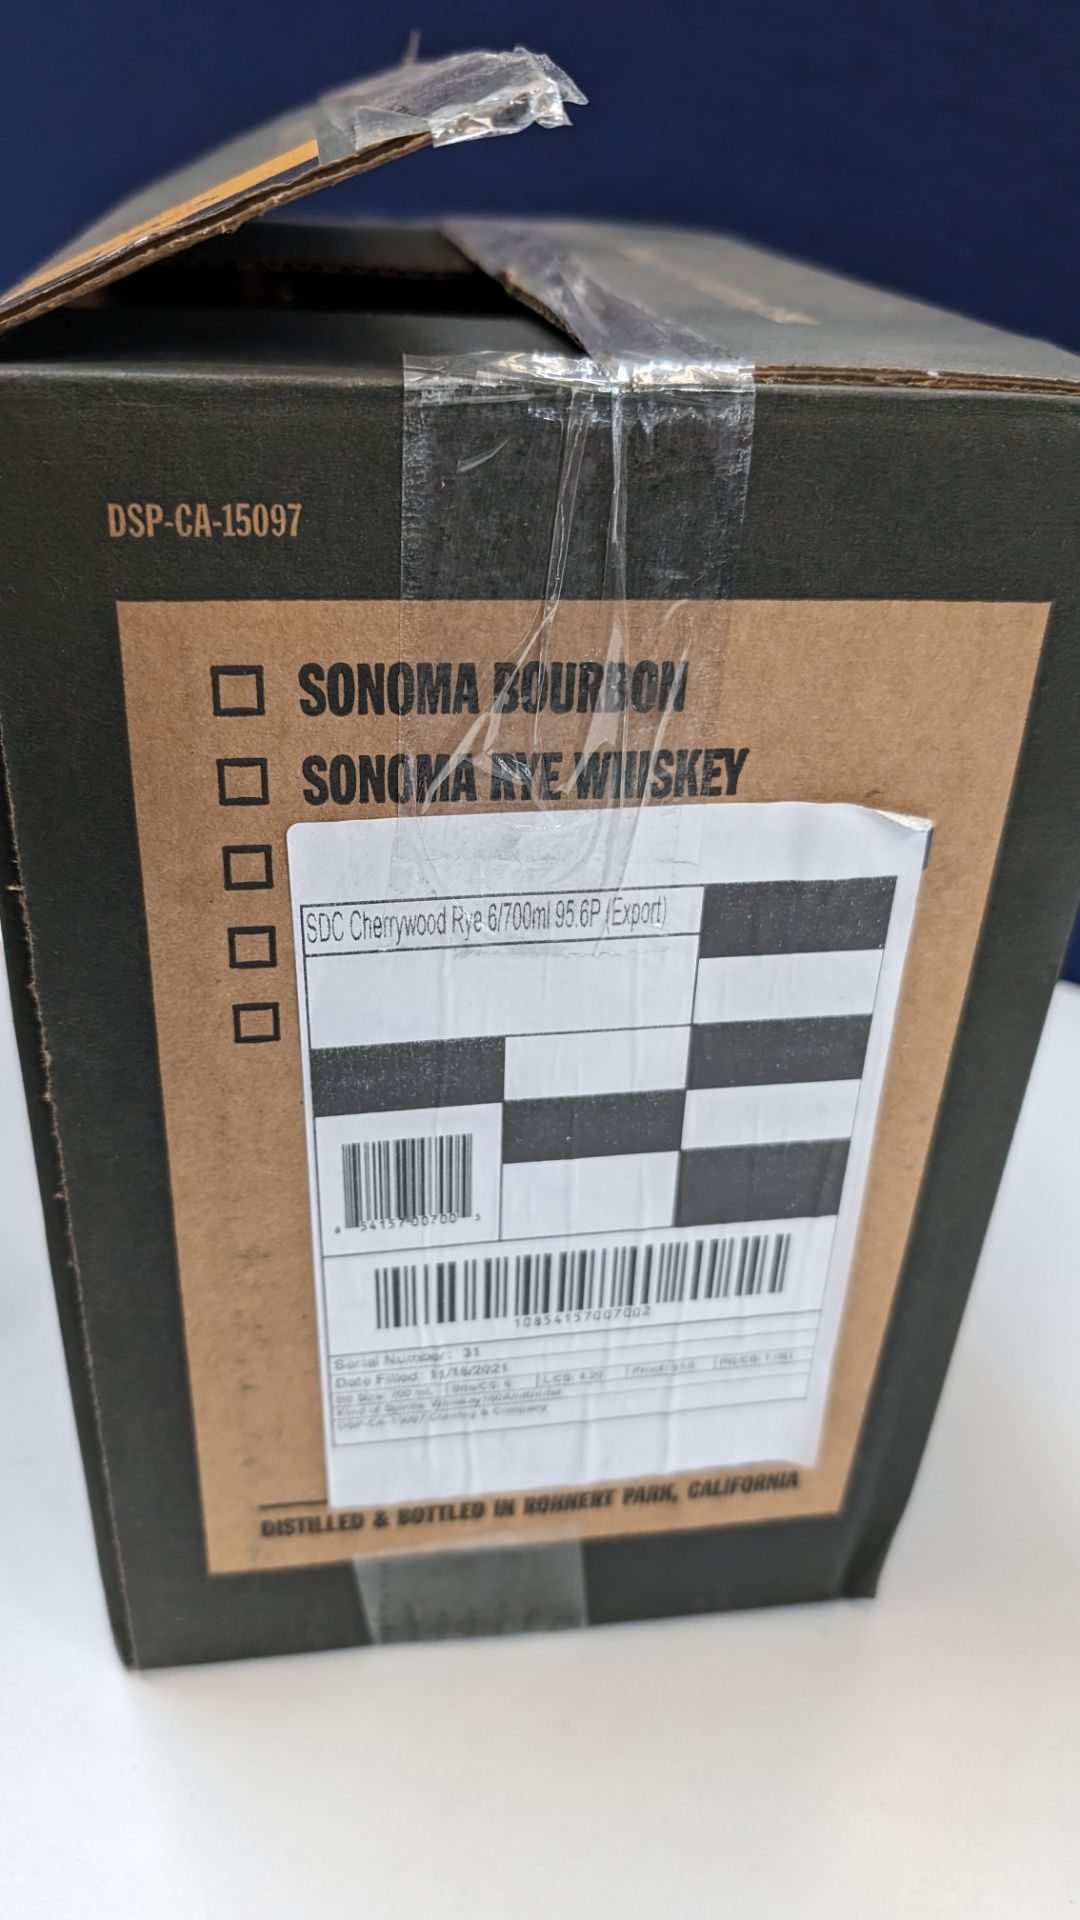 6 off 700ml bottles of Sonoma Cherrywood Rye Whiskey. In Sonoma branded box which includes bottling - Image 4 of 7